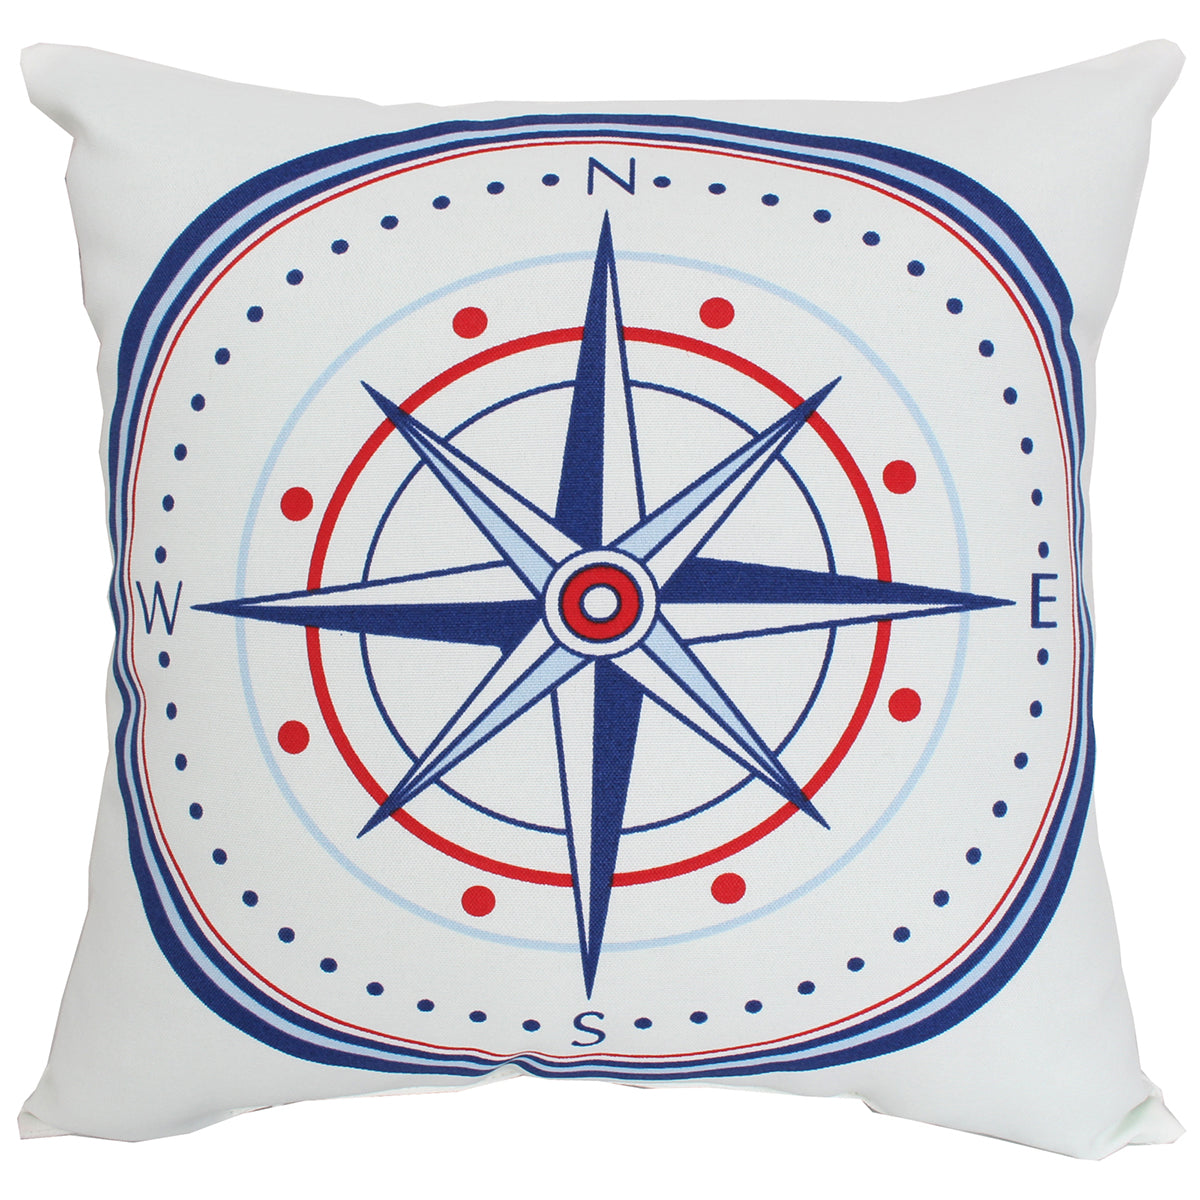 Outdoor Pillow 16" Square Compass